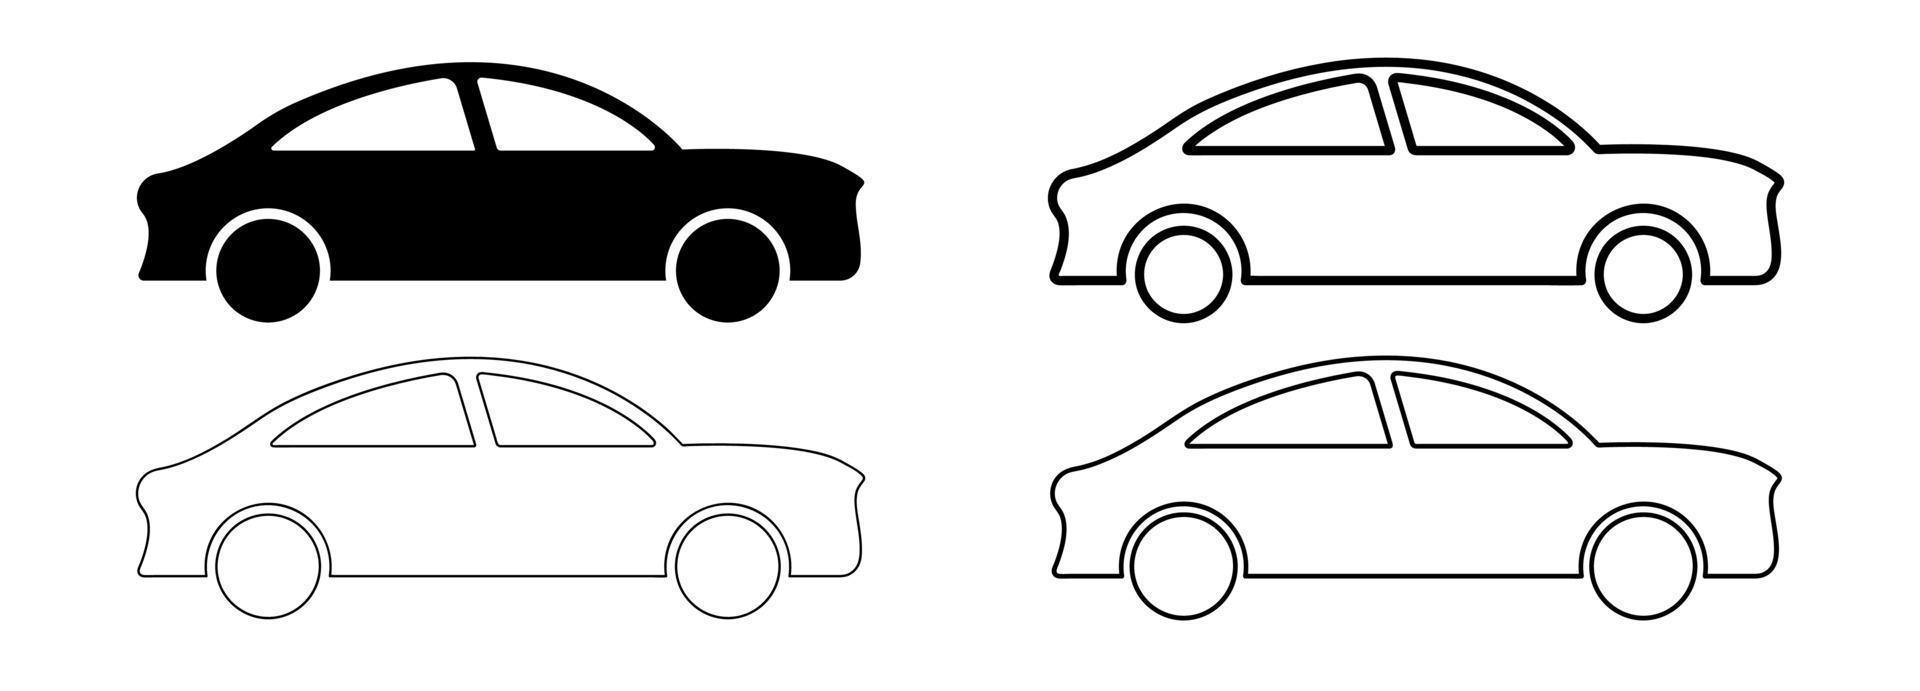 Car in sedan and hatchback silhouette form. Flat art icon set Various line thickness cars set. Editable drawing. Vector on a white background.